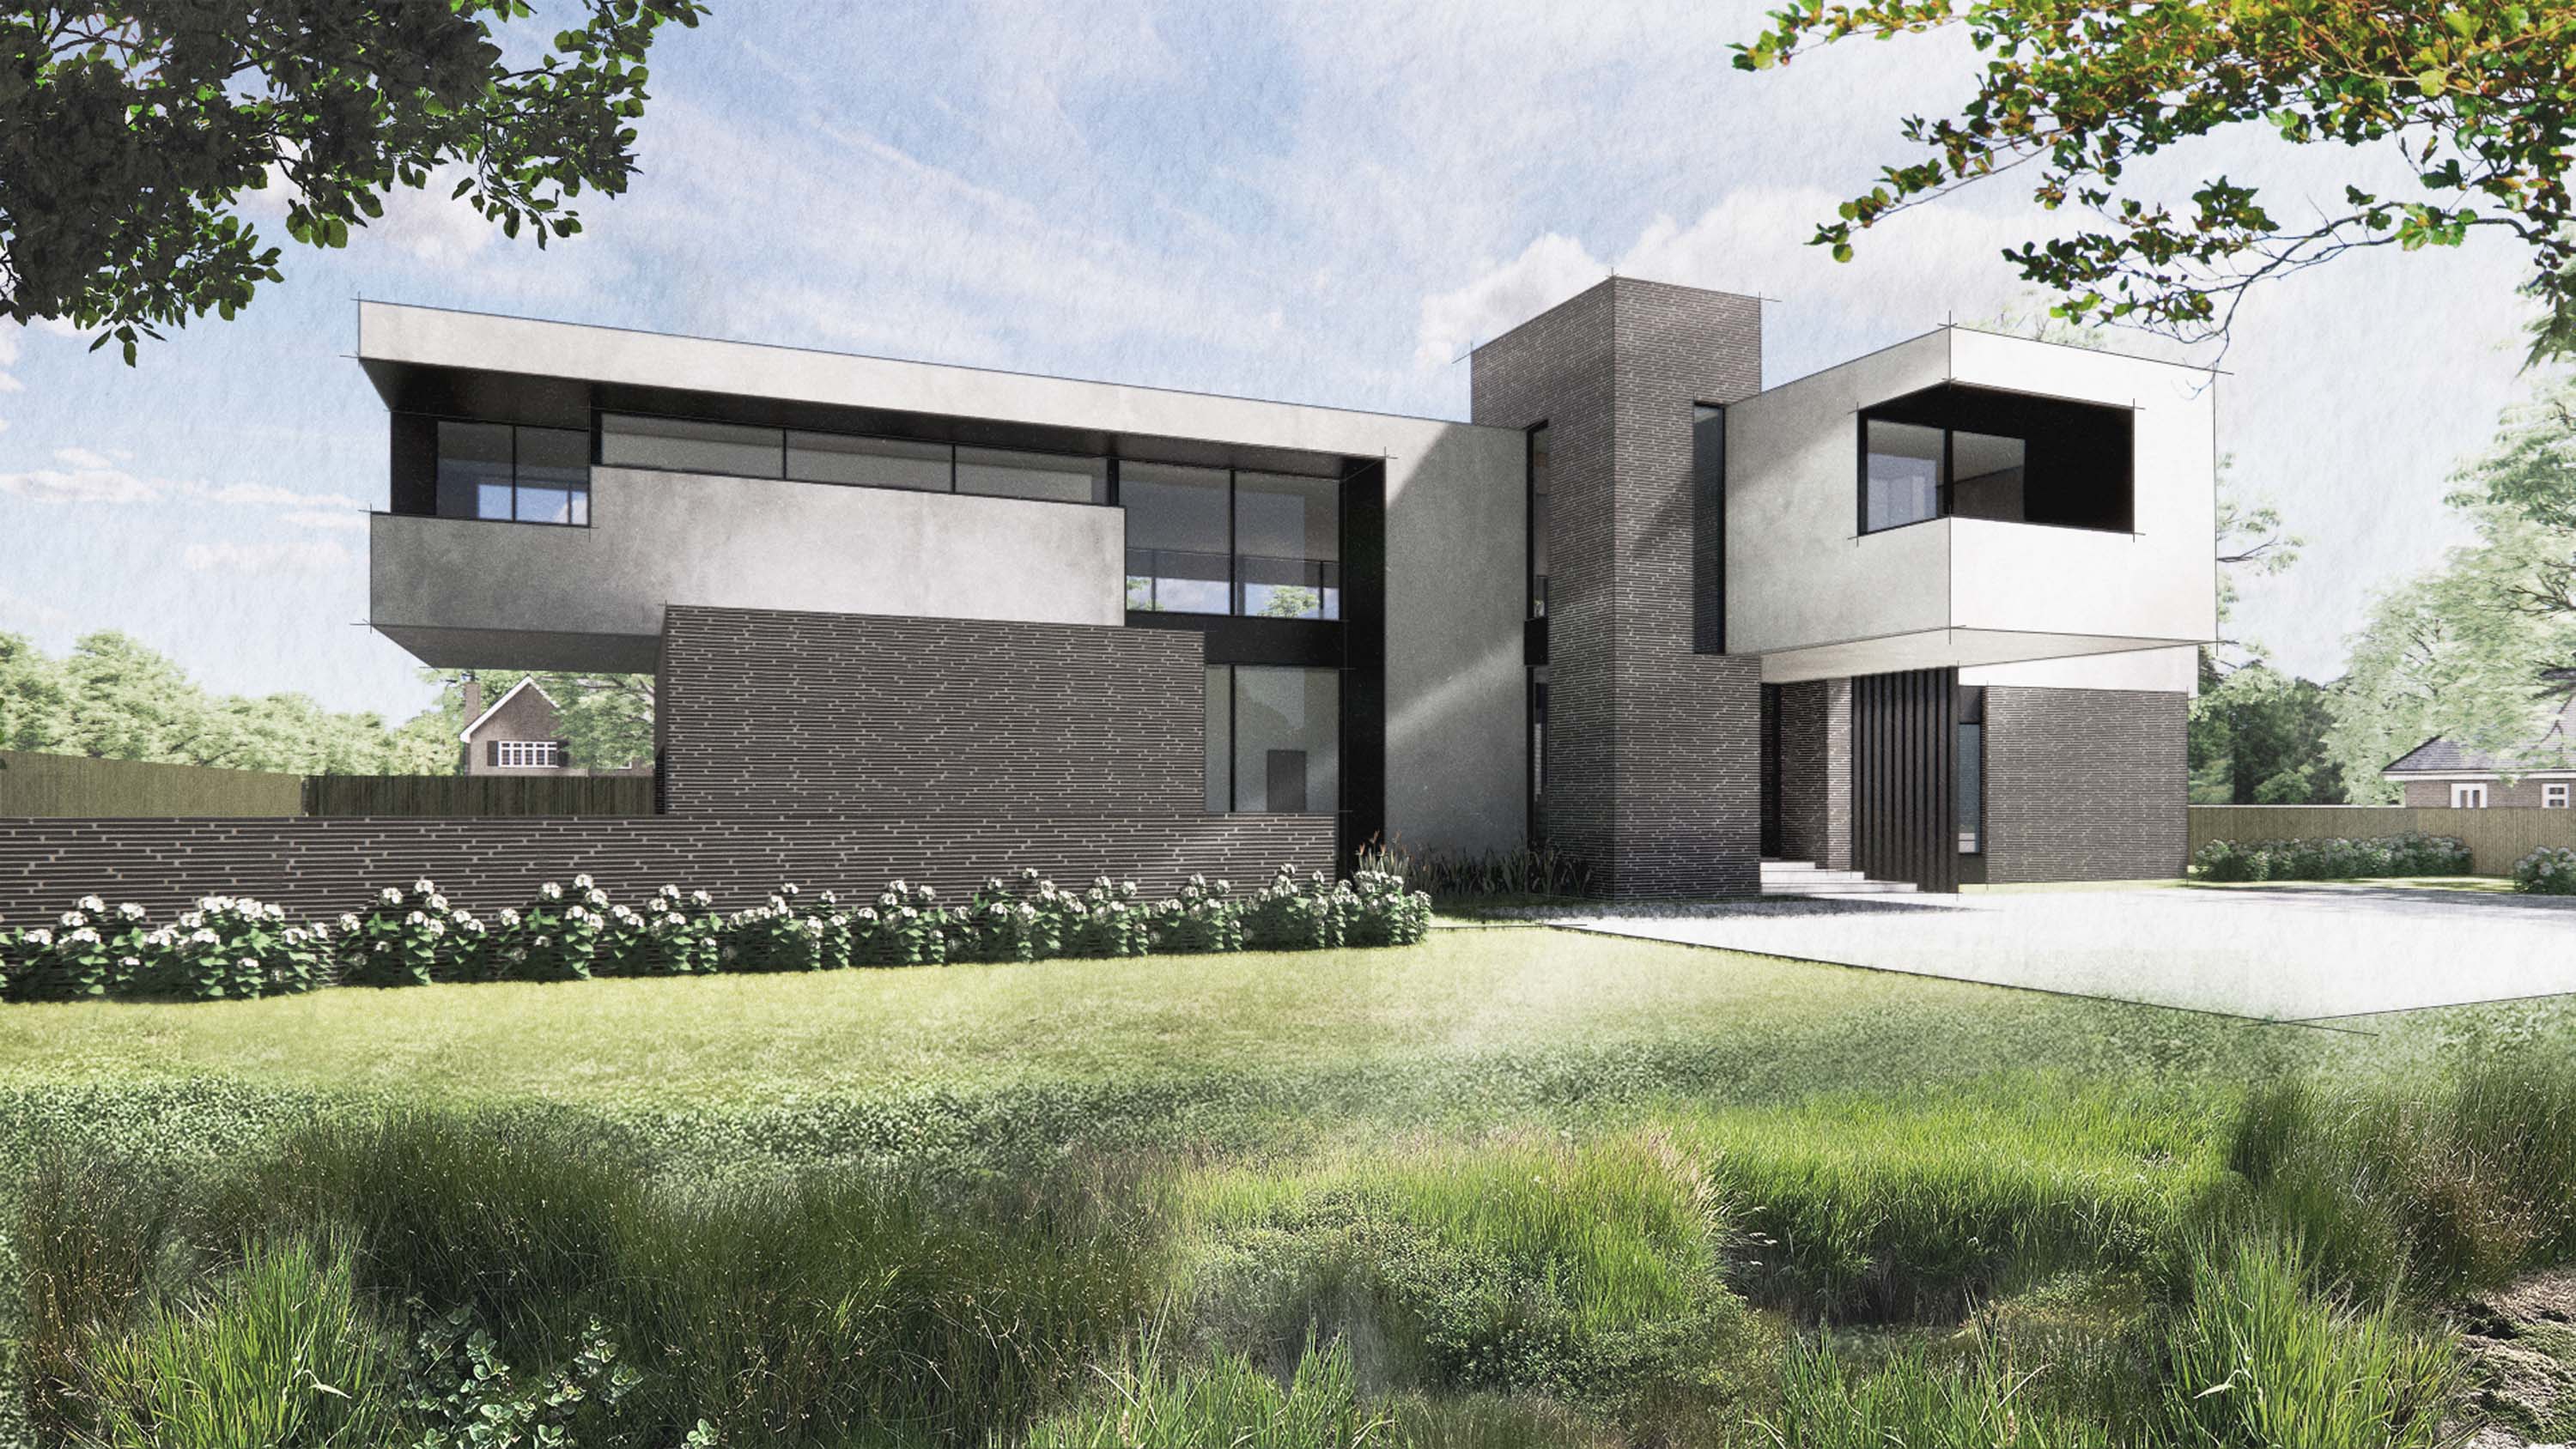 Exterior rendering of the front of Palomar House by Specht Novak Architects featuring large cantilevers and multiple terraces.